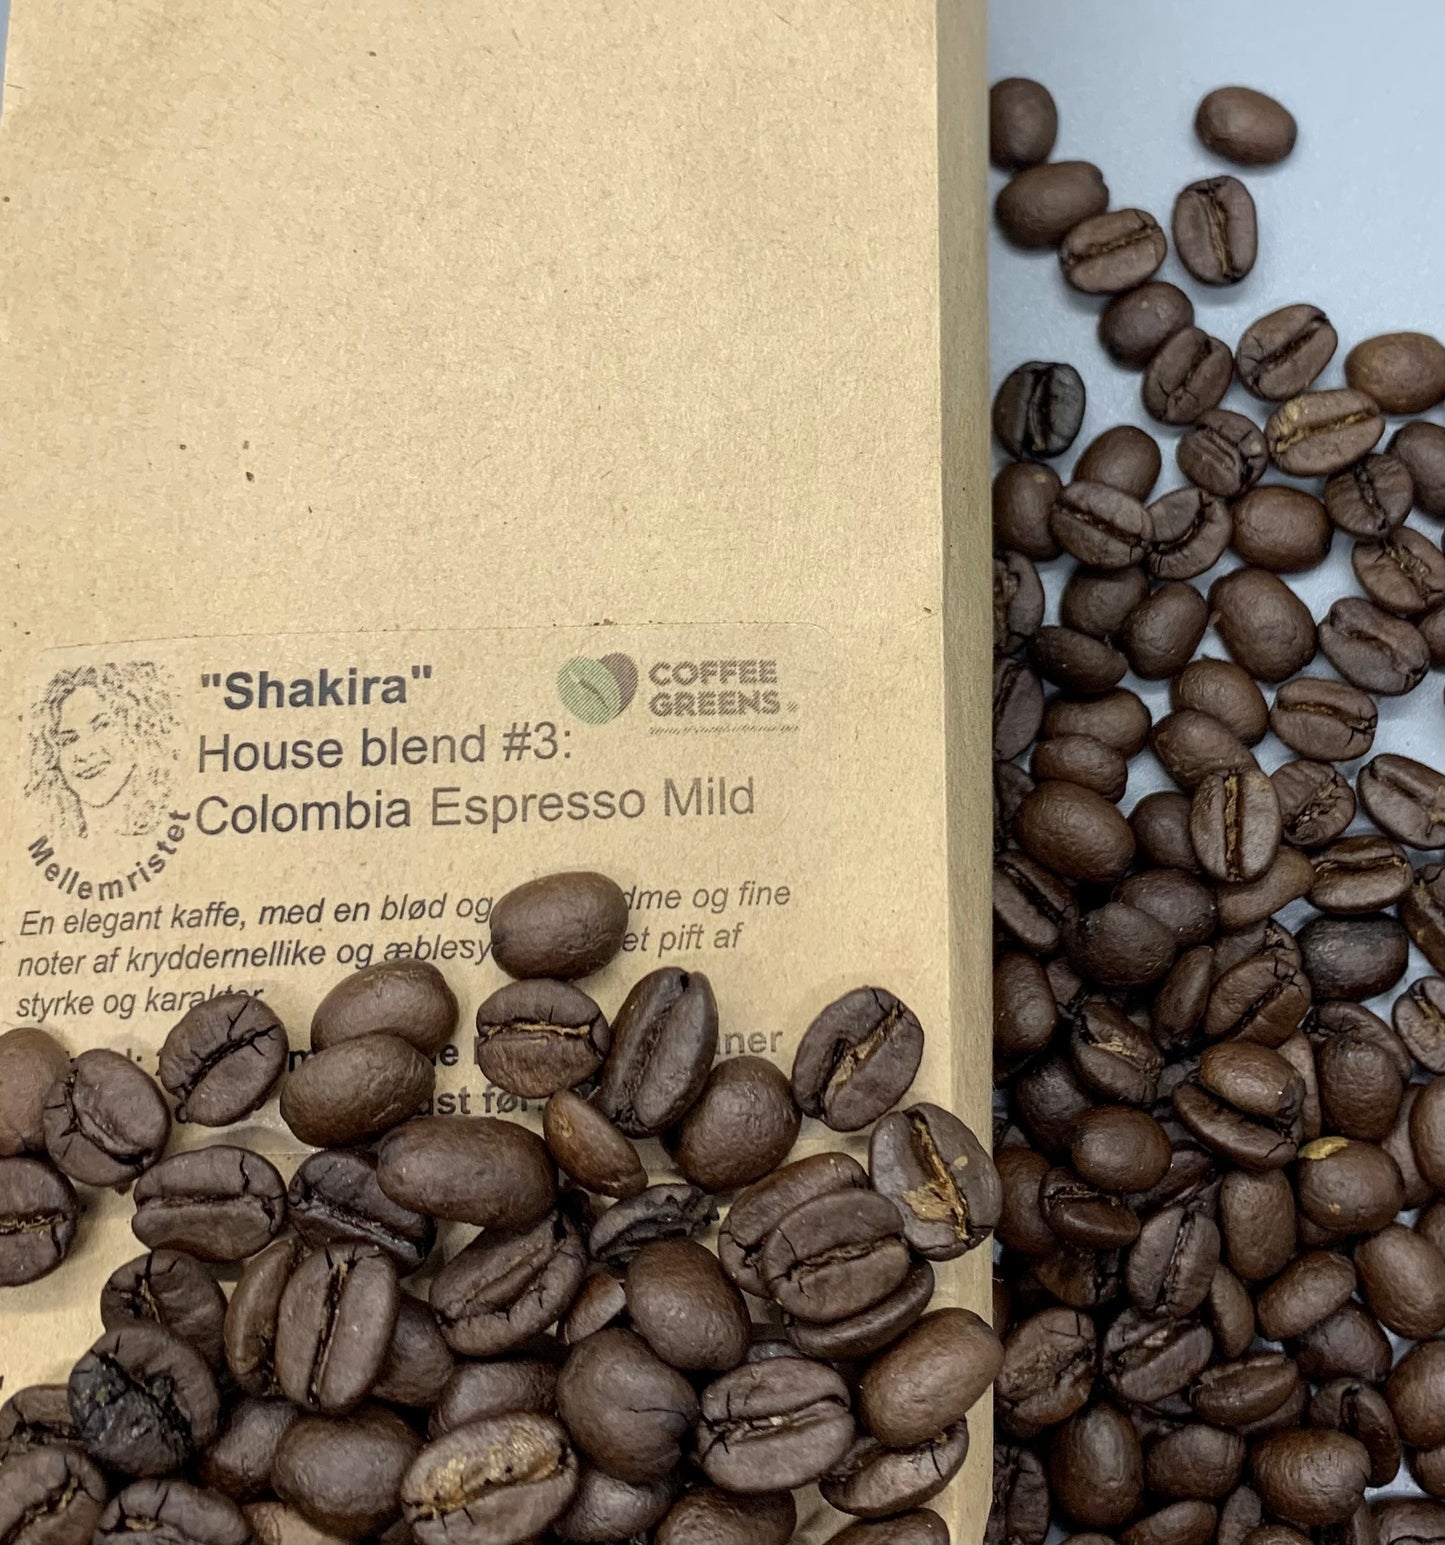 "Shakira"- House blend # 3:Colombia Espresso Mild - Roasted coffee beans